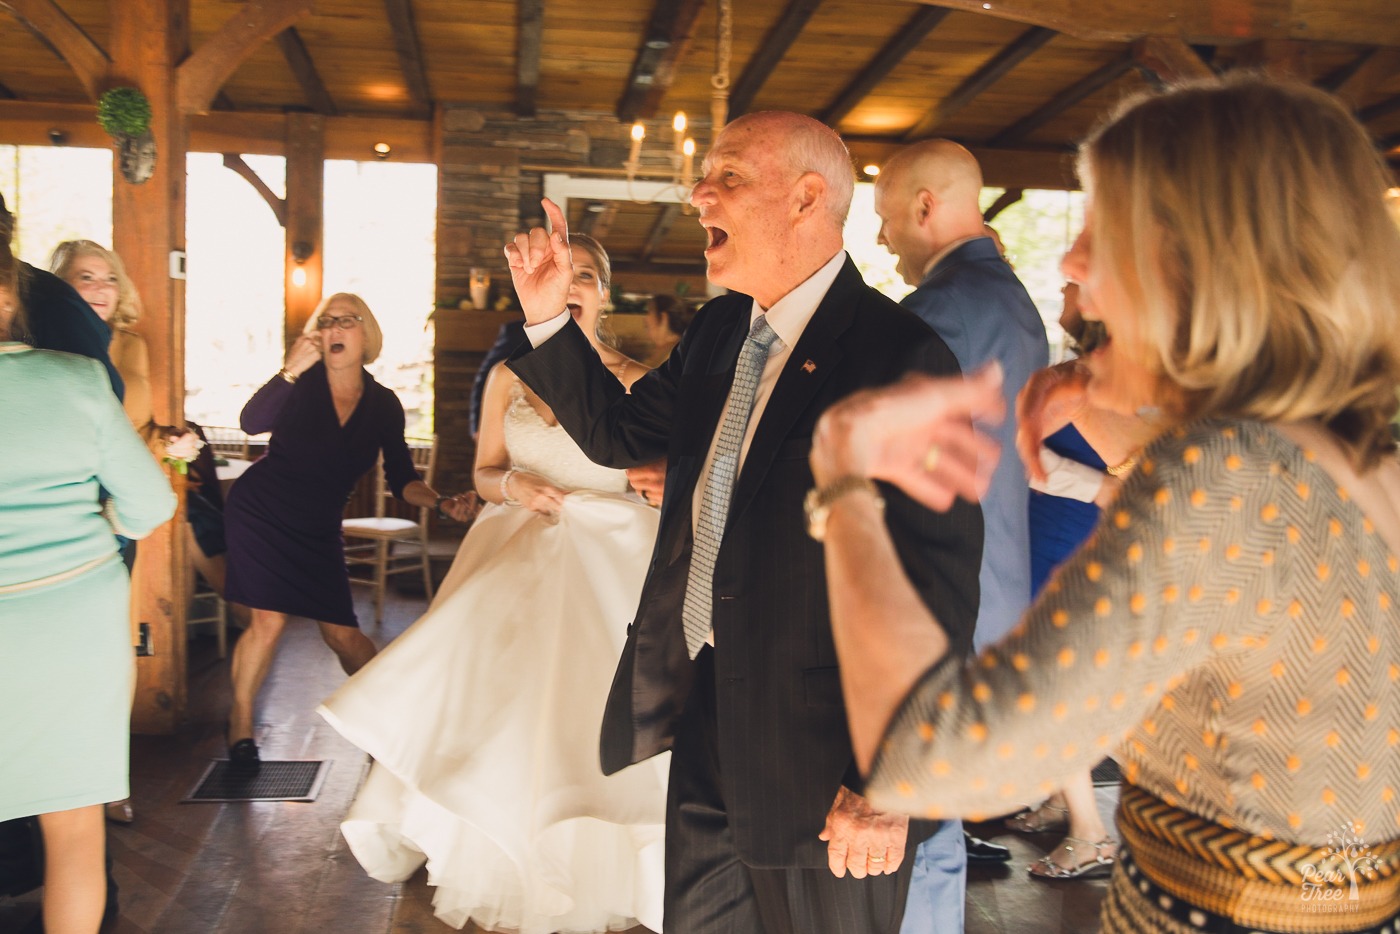 Wedding guests singing on the dance floor while dancing